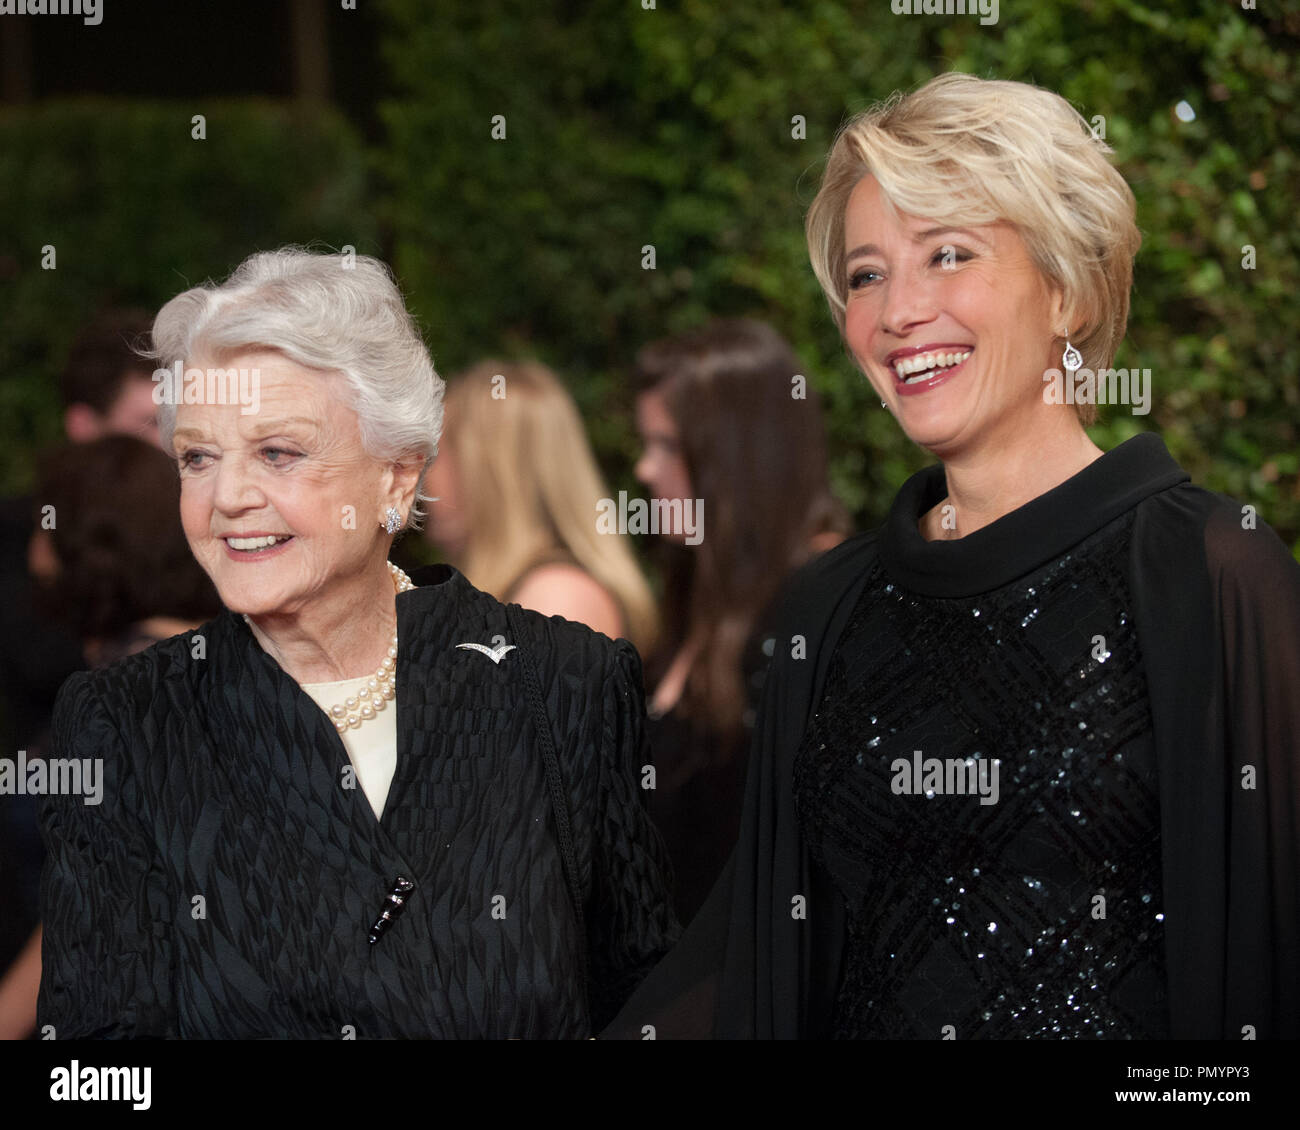 Honorary Award recipient Angela Lansbury  (left) and actress Emma Thompson attend the 5th Annual Governors Awards at The Ray Dolby Ballroom at Hollywood & Highland Center® in Hollywood, CA, on Saturday, November 16, 2013.  File Reference # 32184 030  For Editorial Use Only -  All Rights Reserved Stock Photo